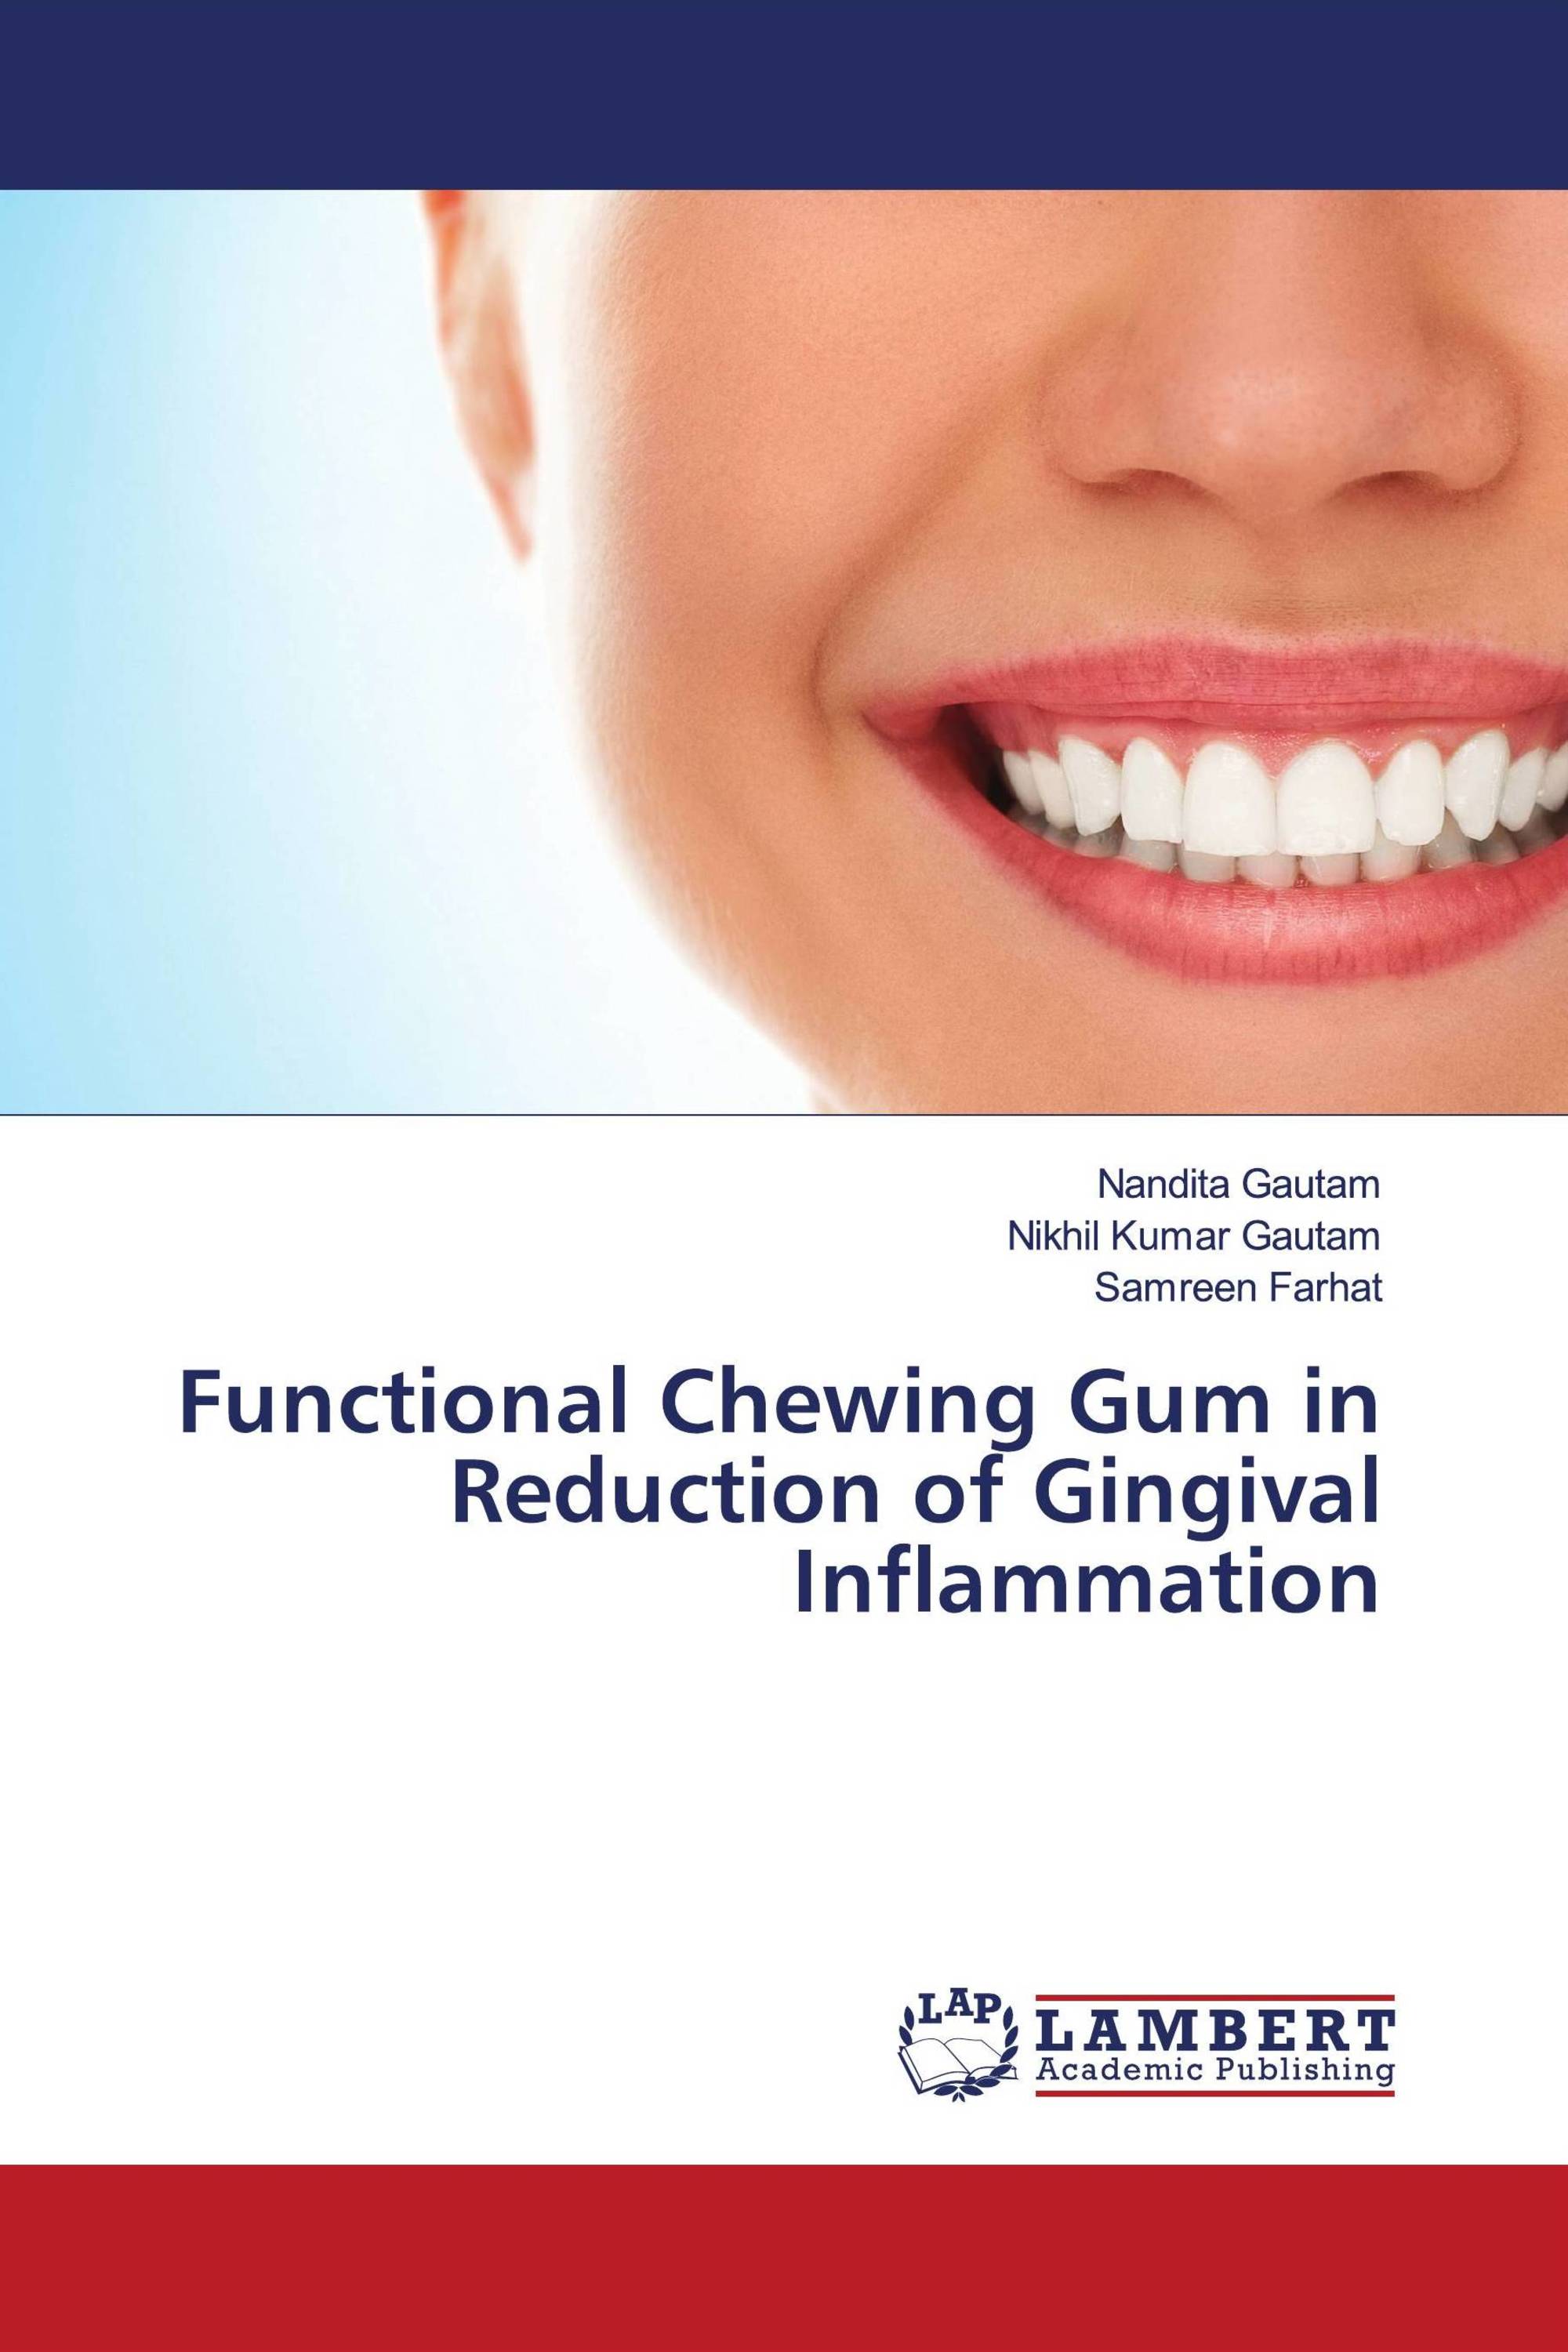 Functional Chewing Gum in Reduction of Gingival Inflammation